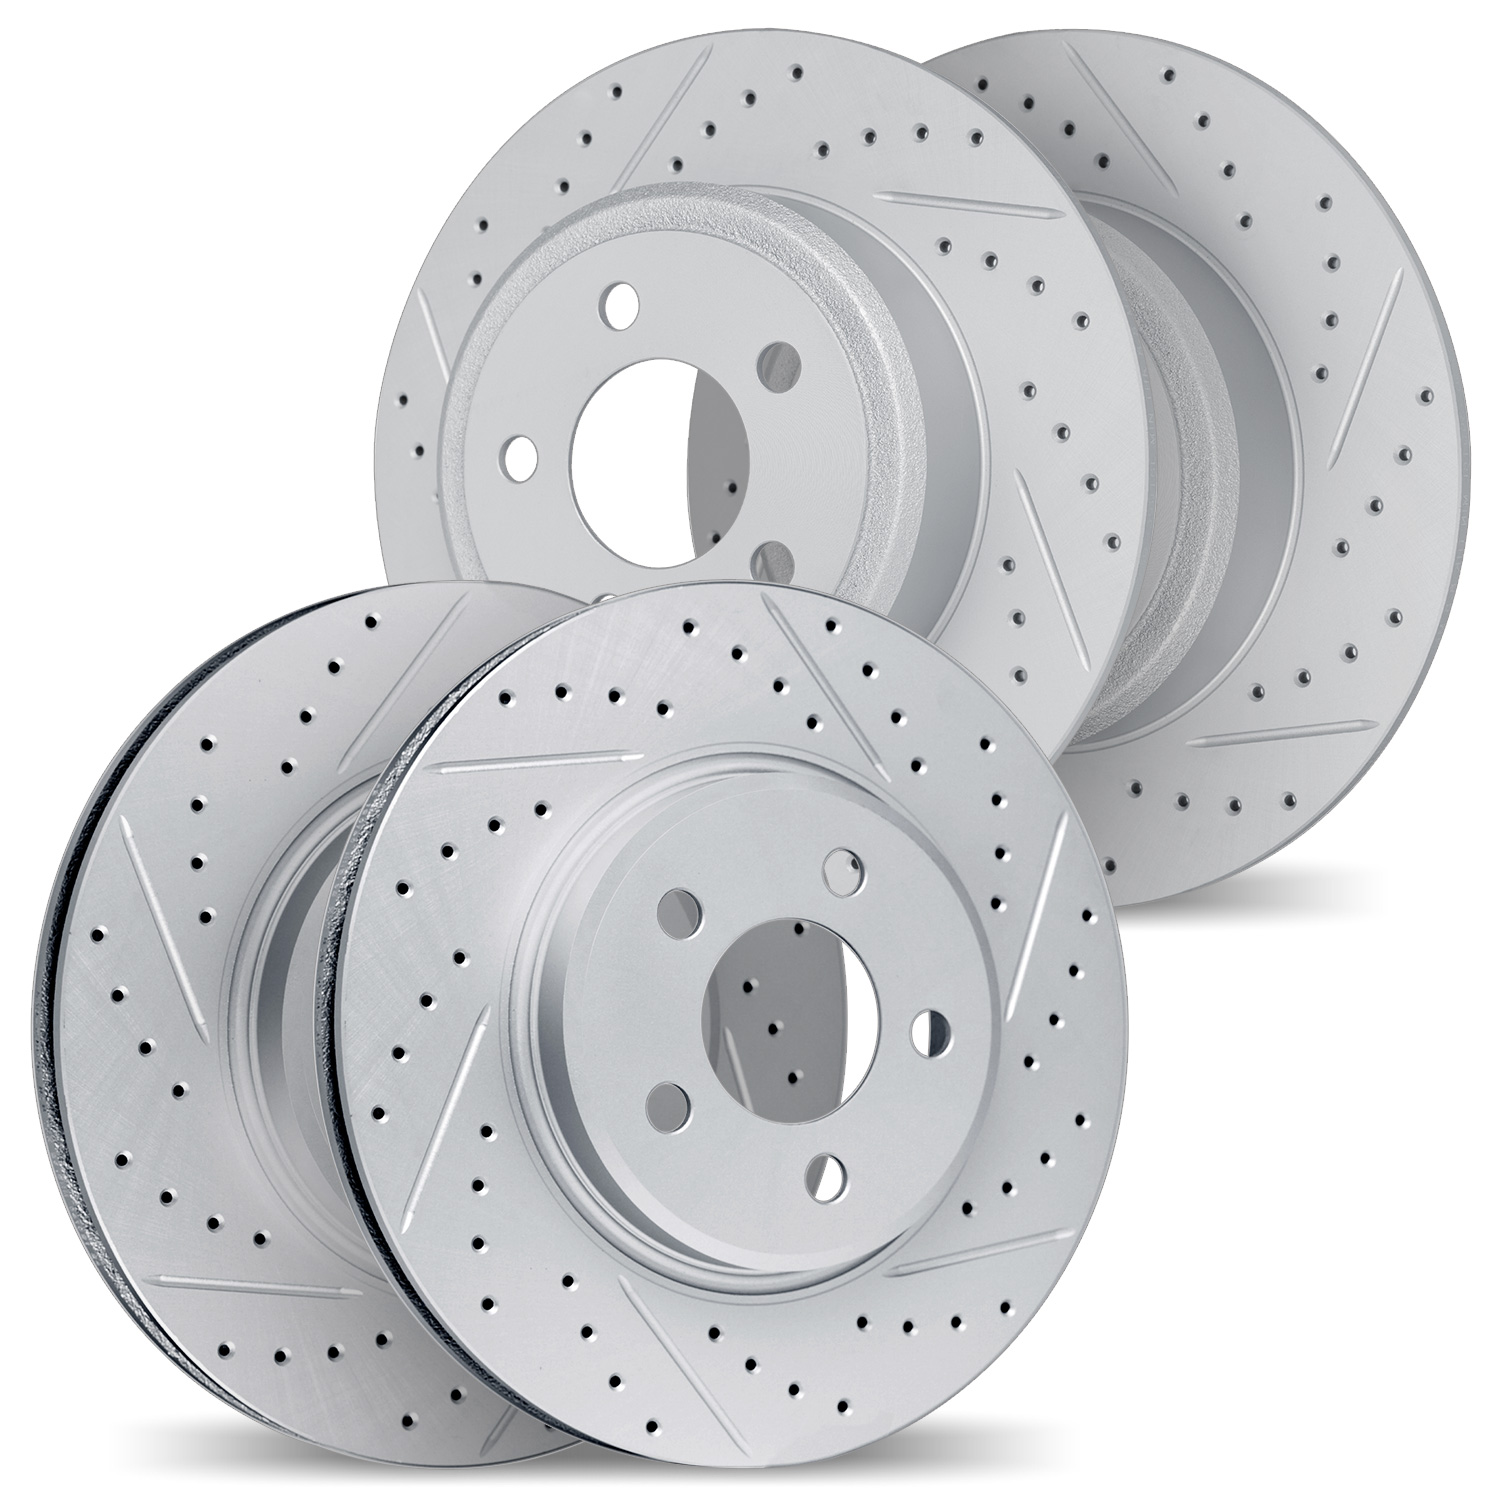 2004-45028 Geoperformance Drilled/Slotted Brake Rotors, 2011-2016 GM, Position: Front and Rear